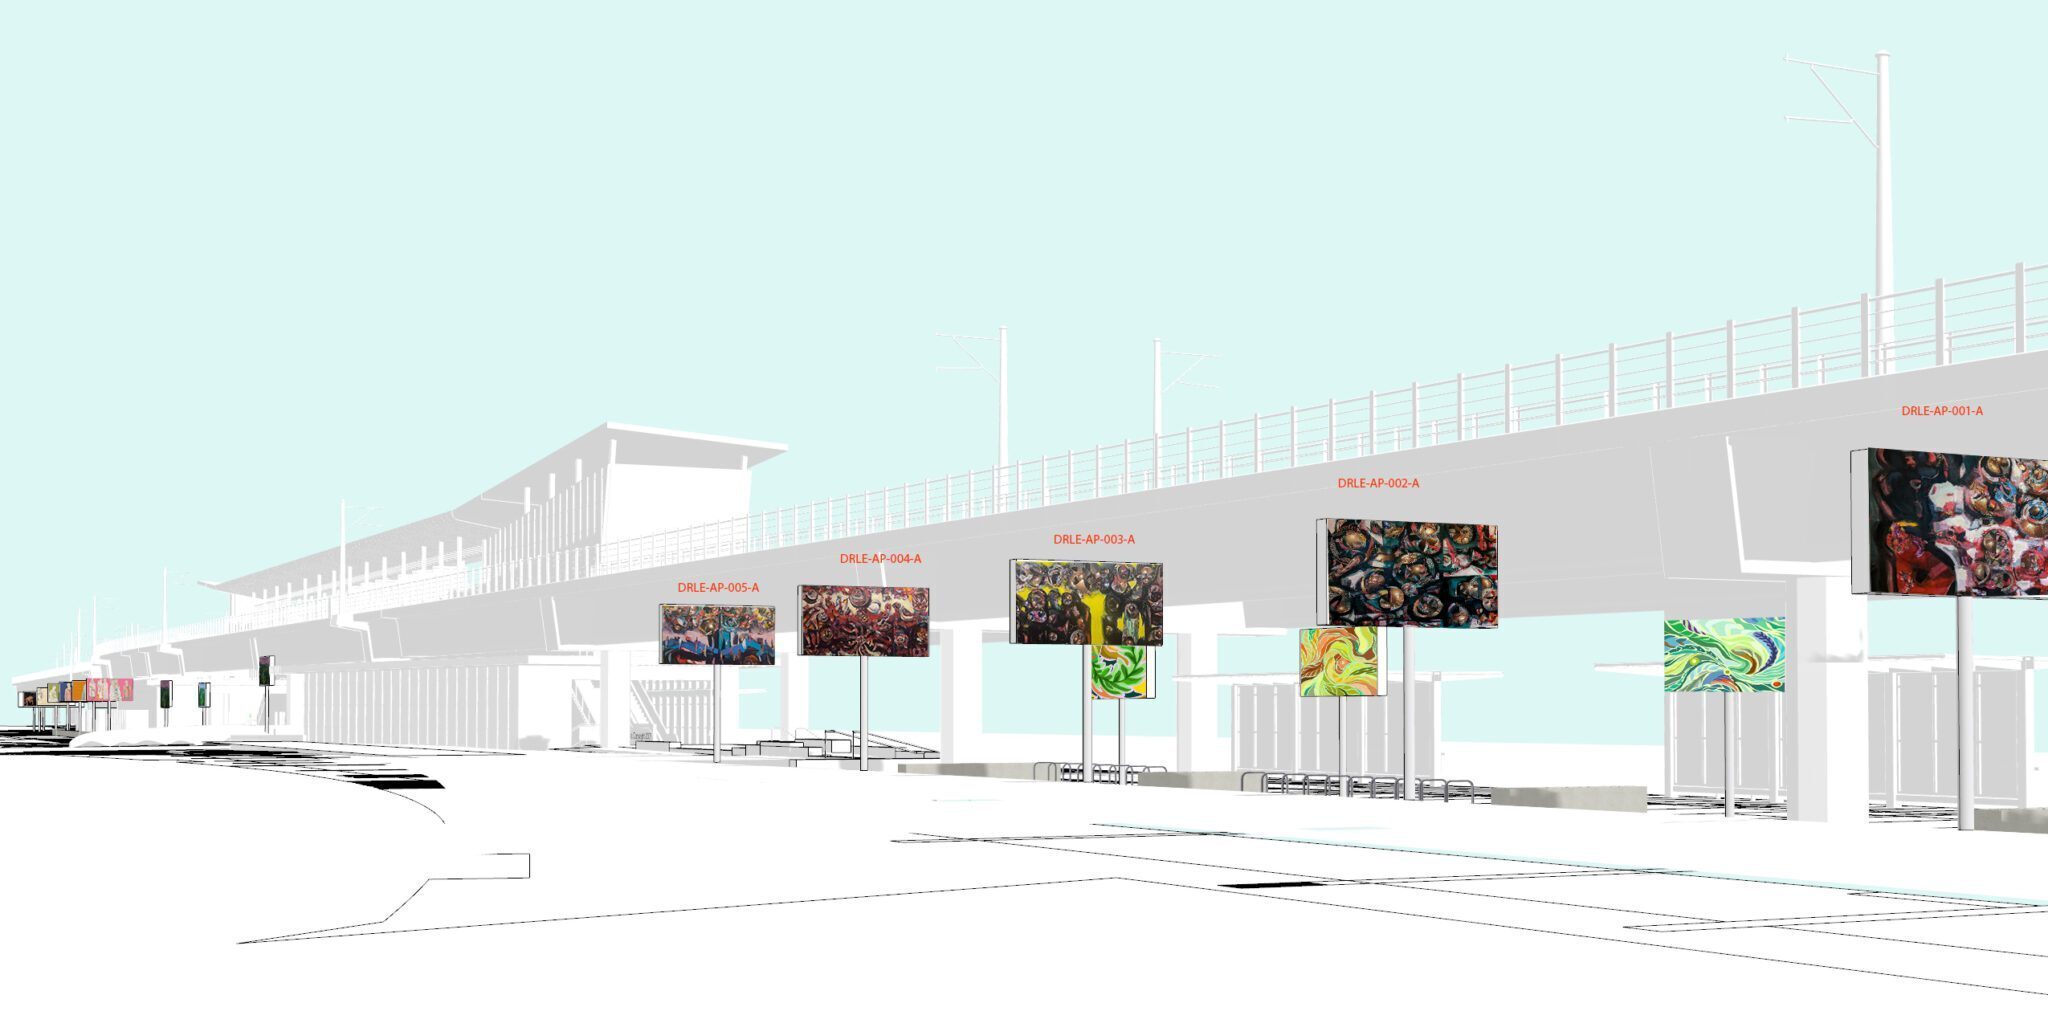 Mock up image of light rail station with billboard containing paintings lining the sides